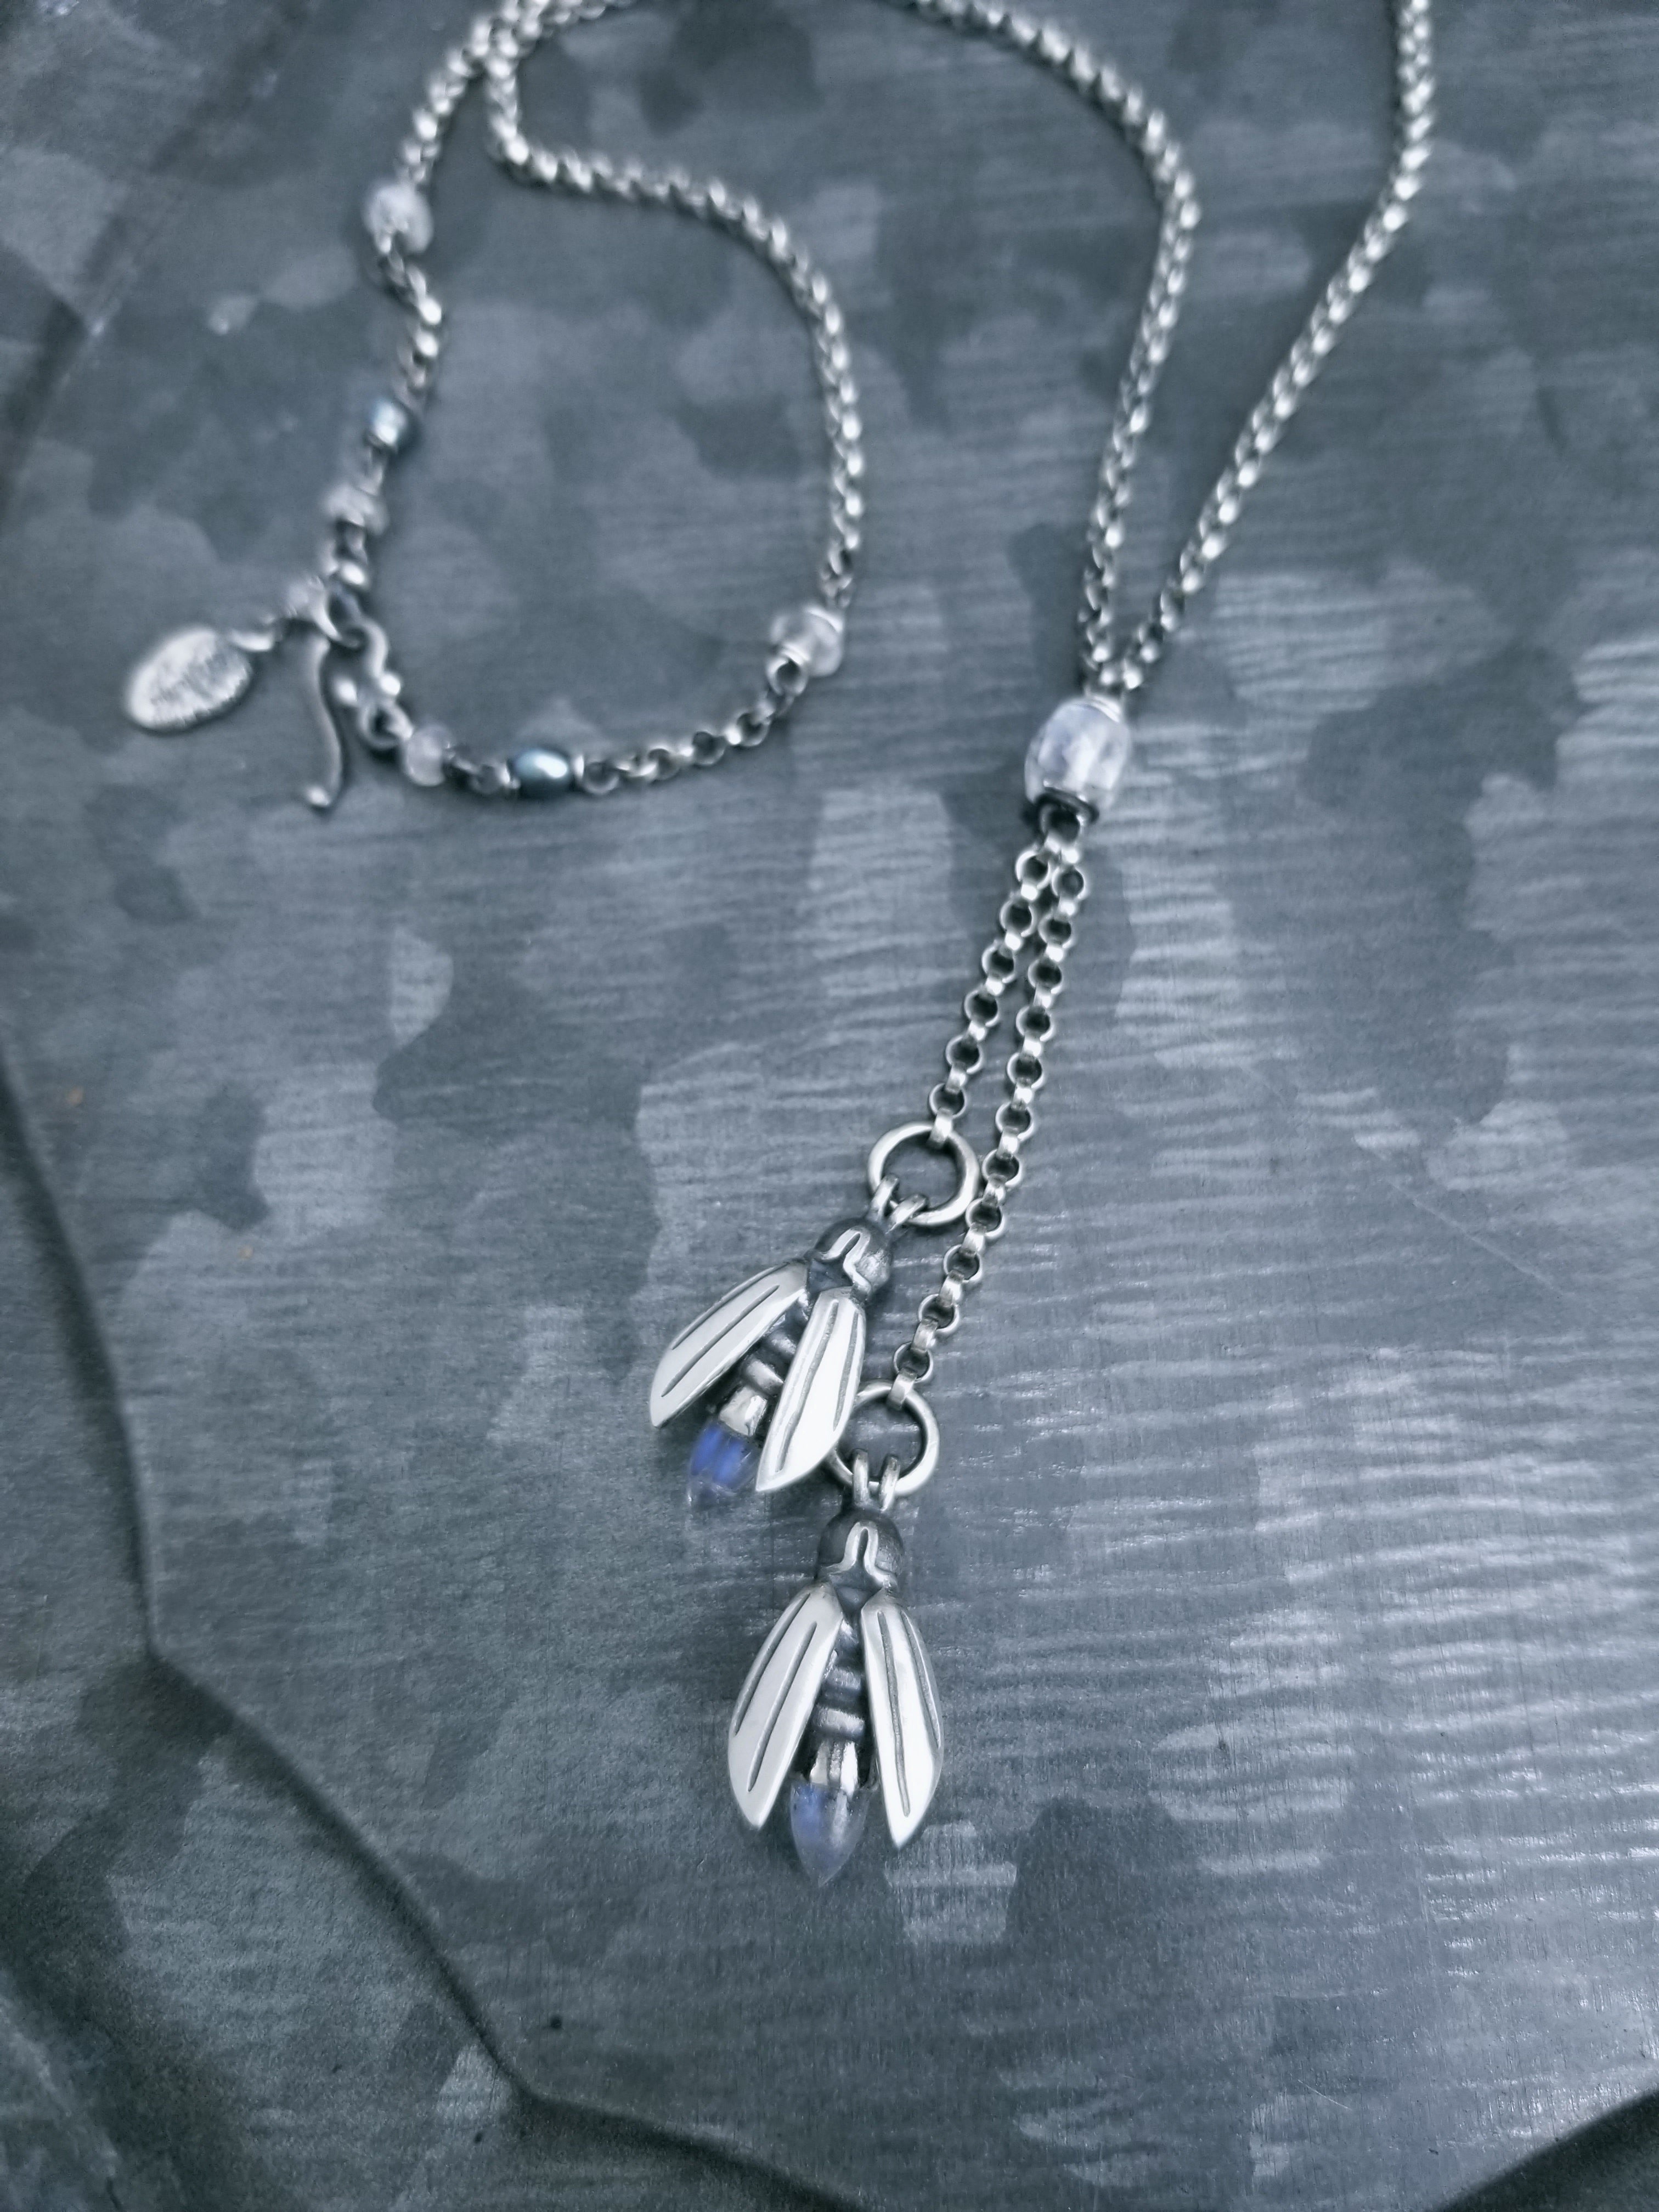 Moonstone Firefly Lariat Necklace